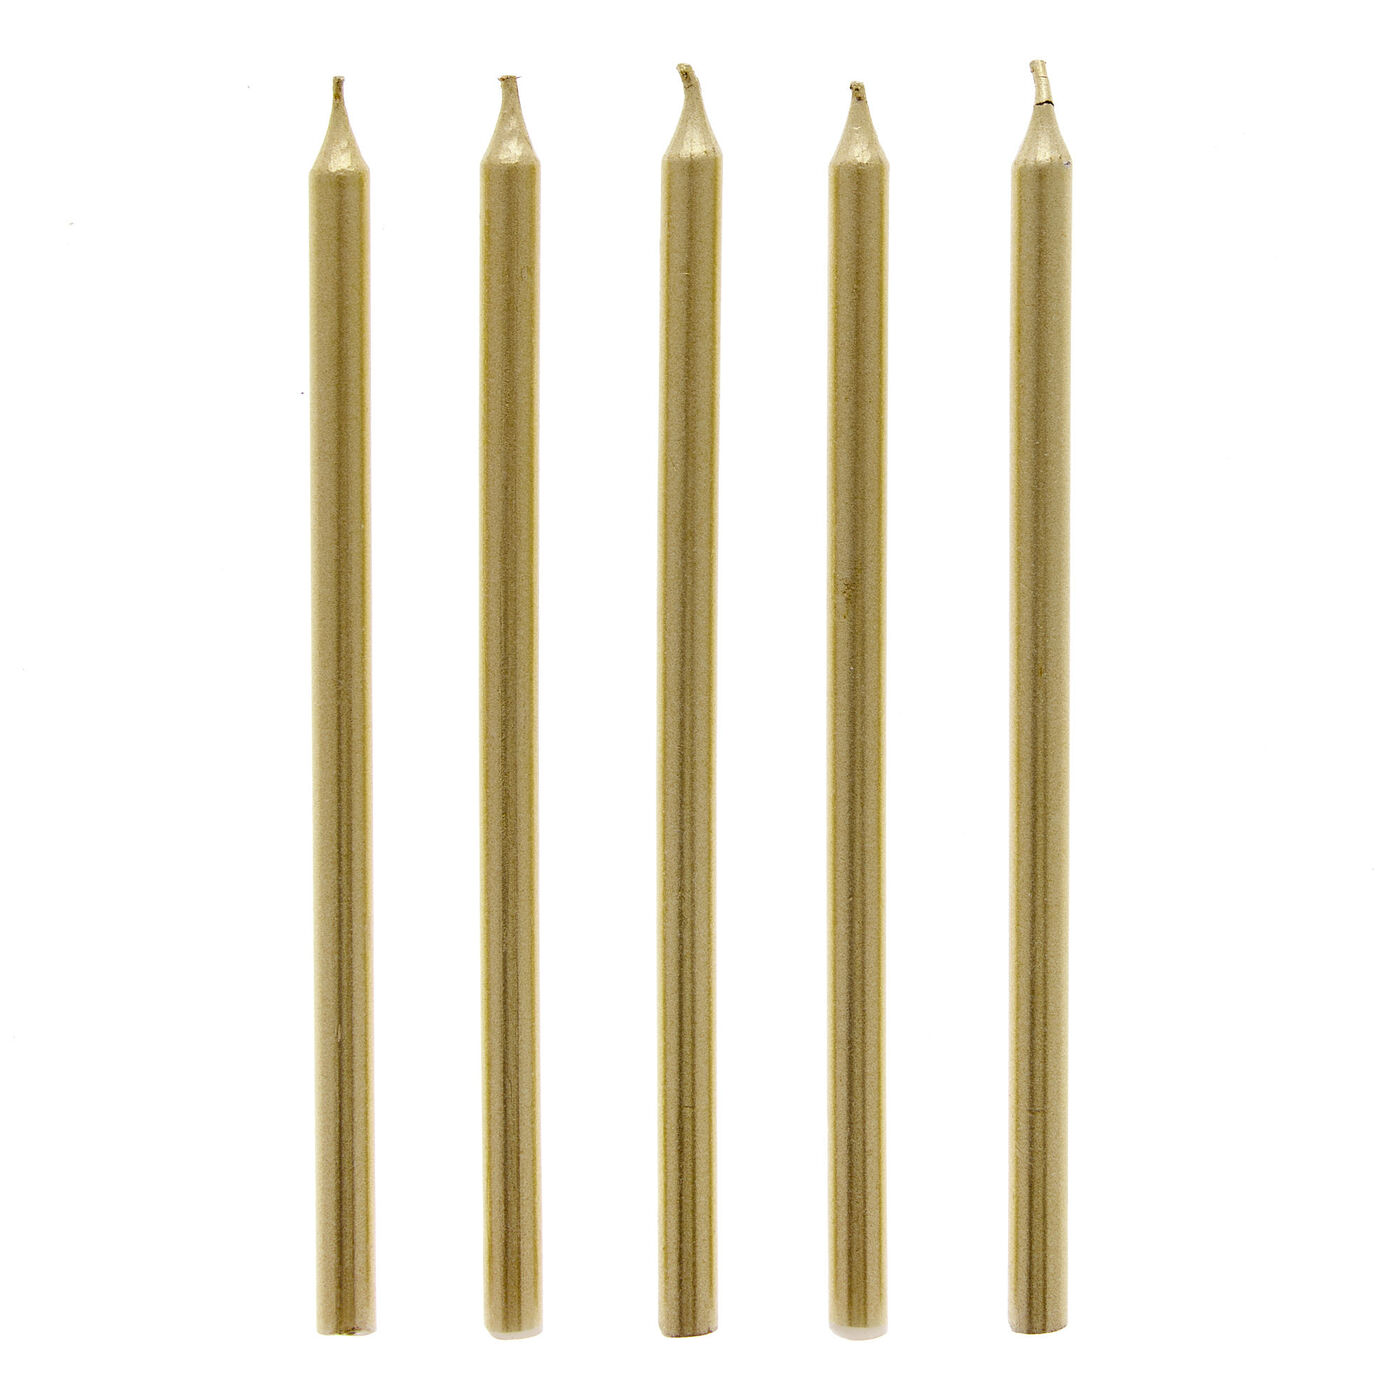 Gold Tall Candles Tall Gold Birthday Candles Gold Cake Candles